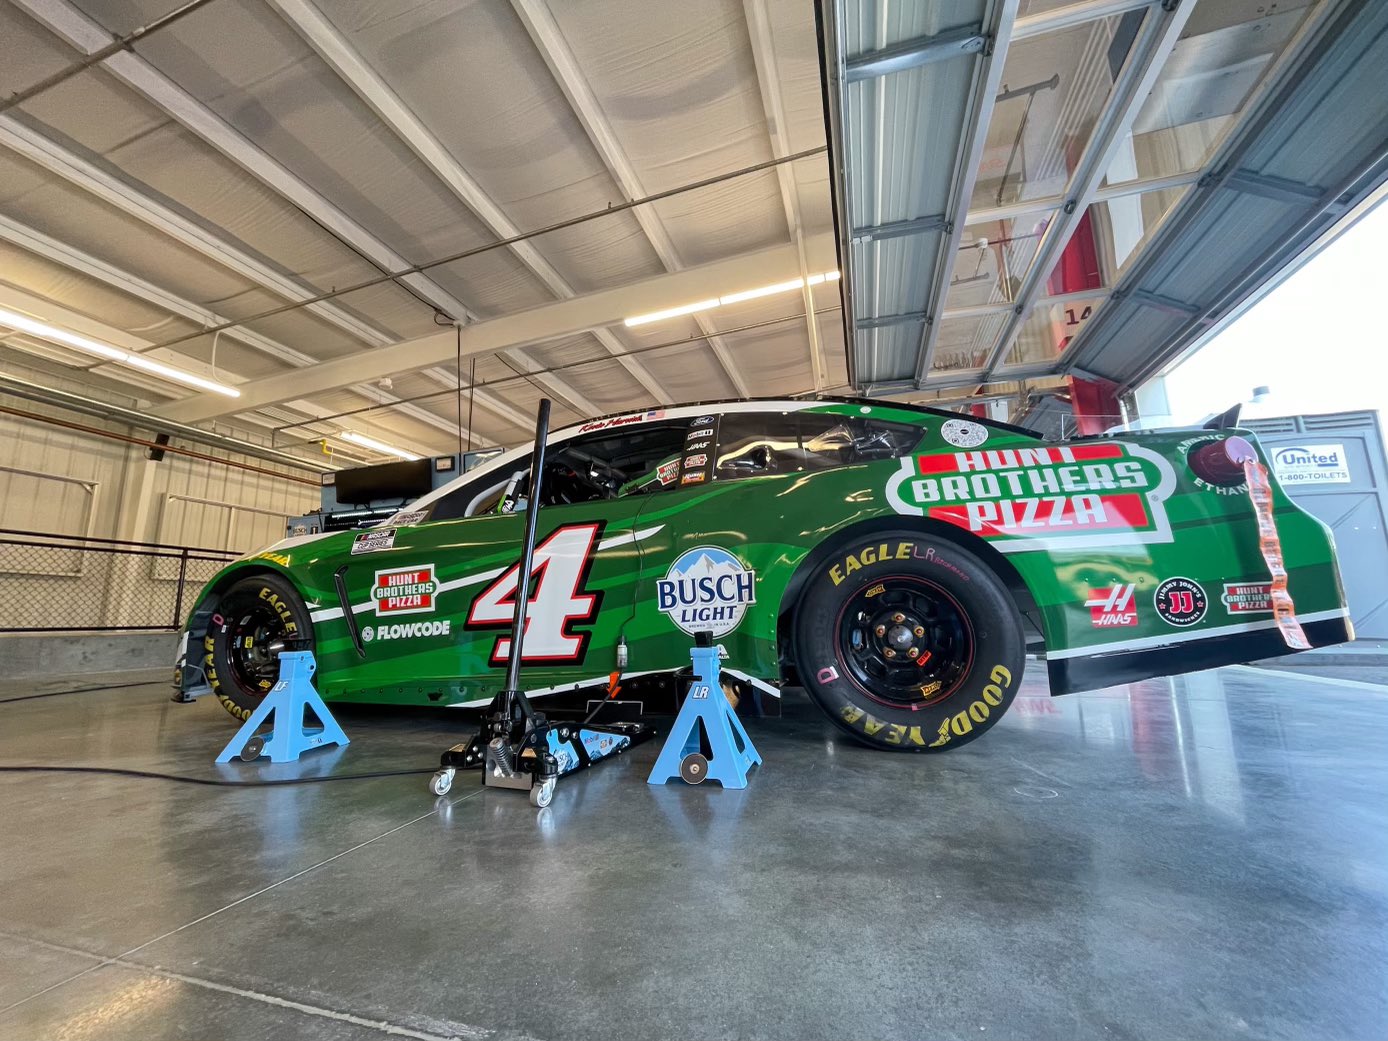 Flowcode To Place a QR Code on Nascar Race Car